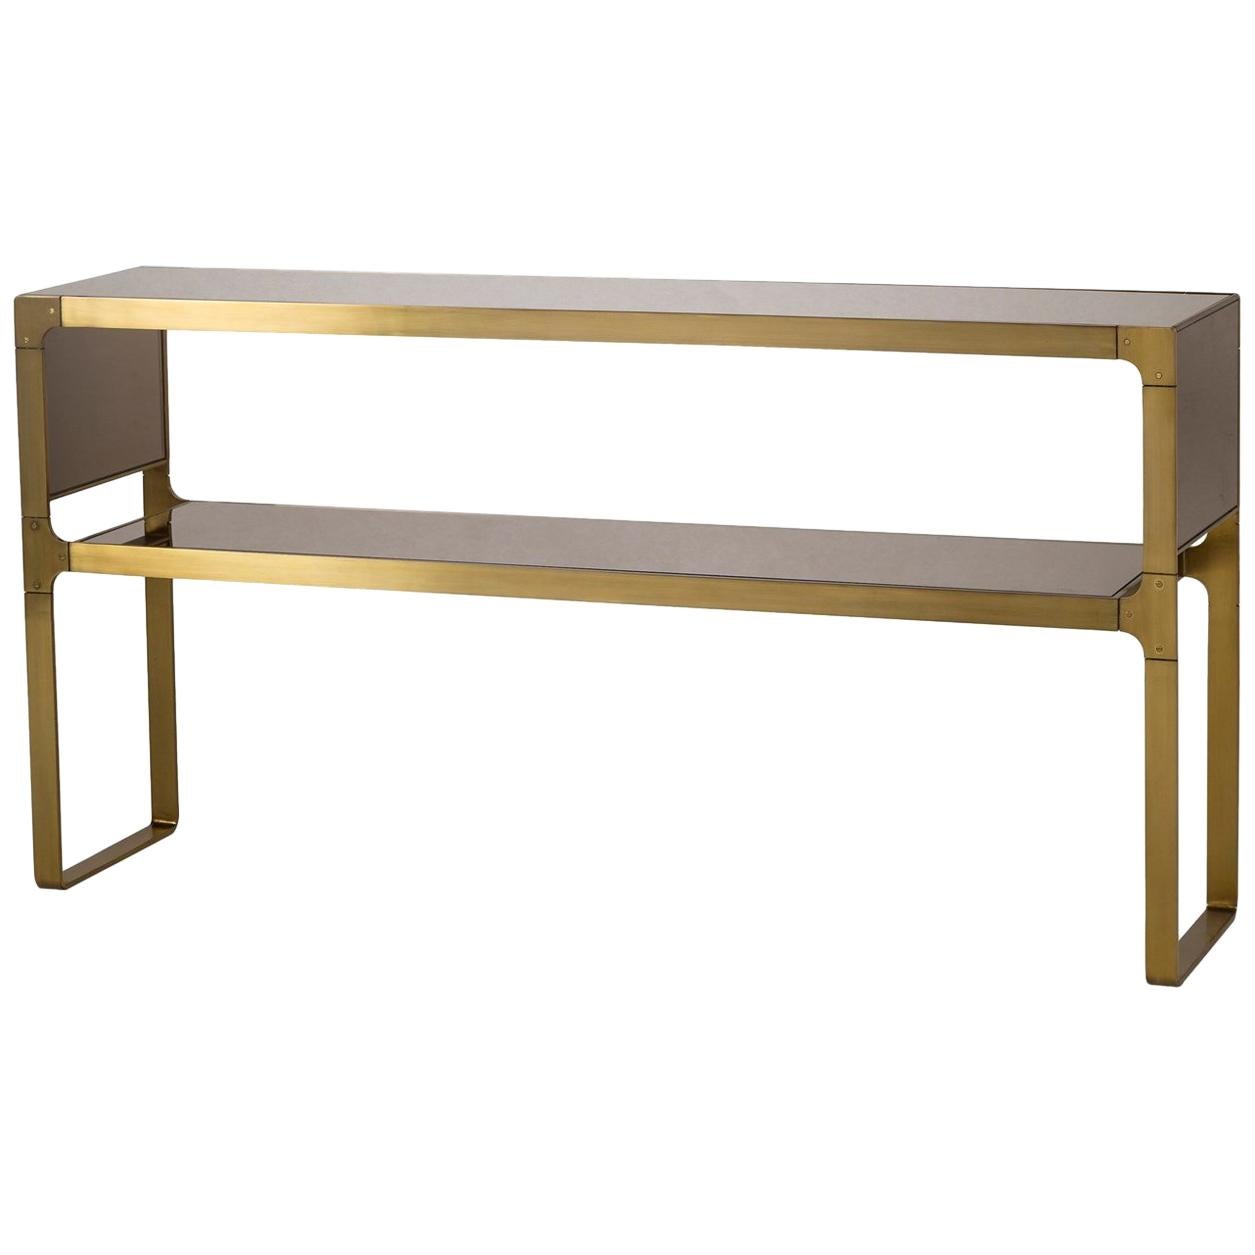 Sturdy Console Table in Satin Brass Finish